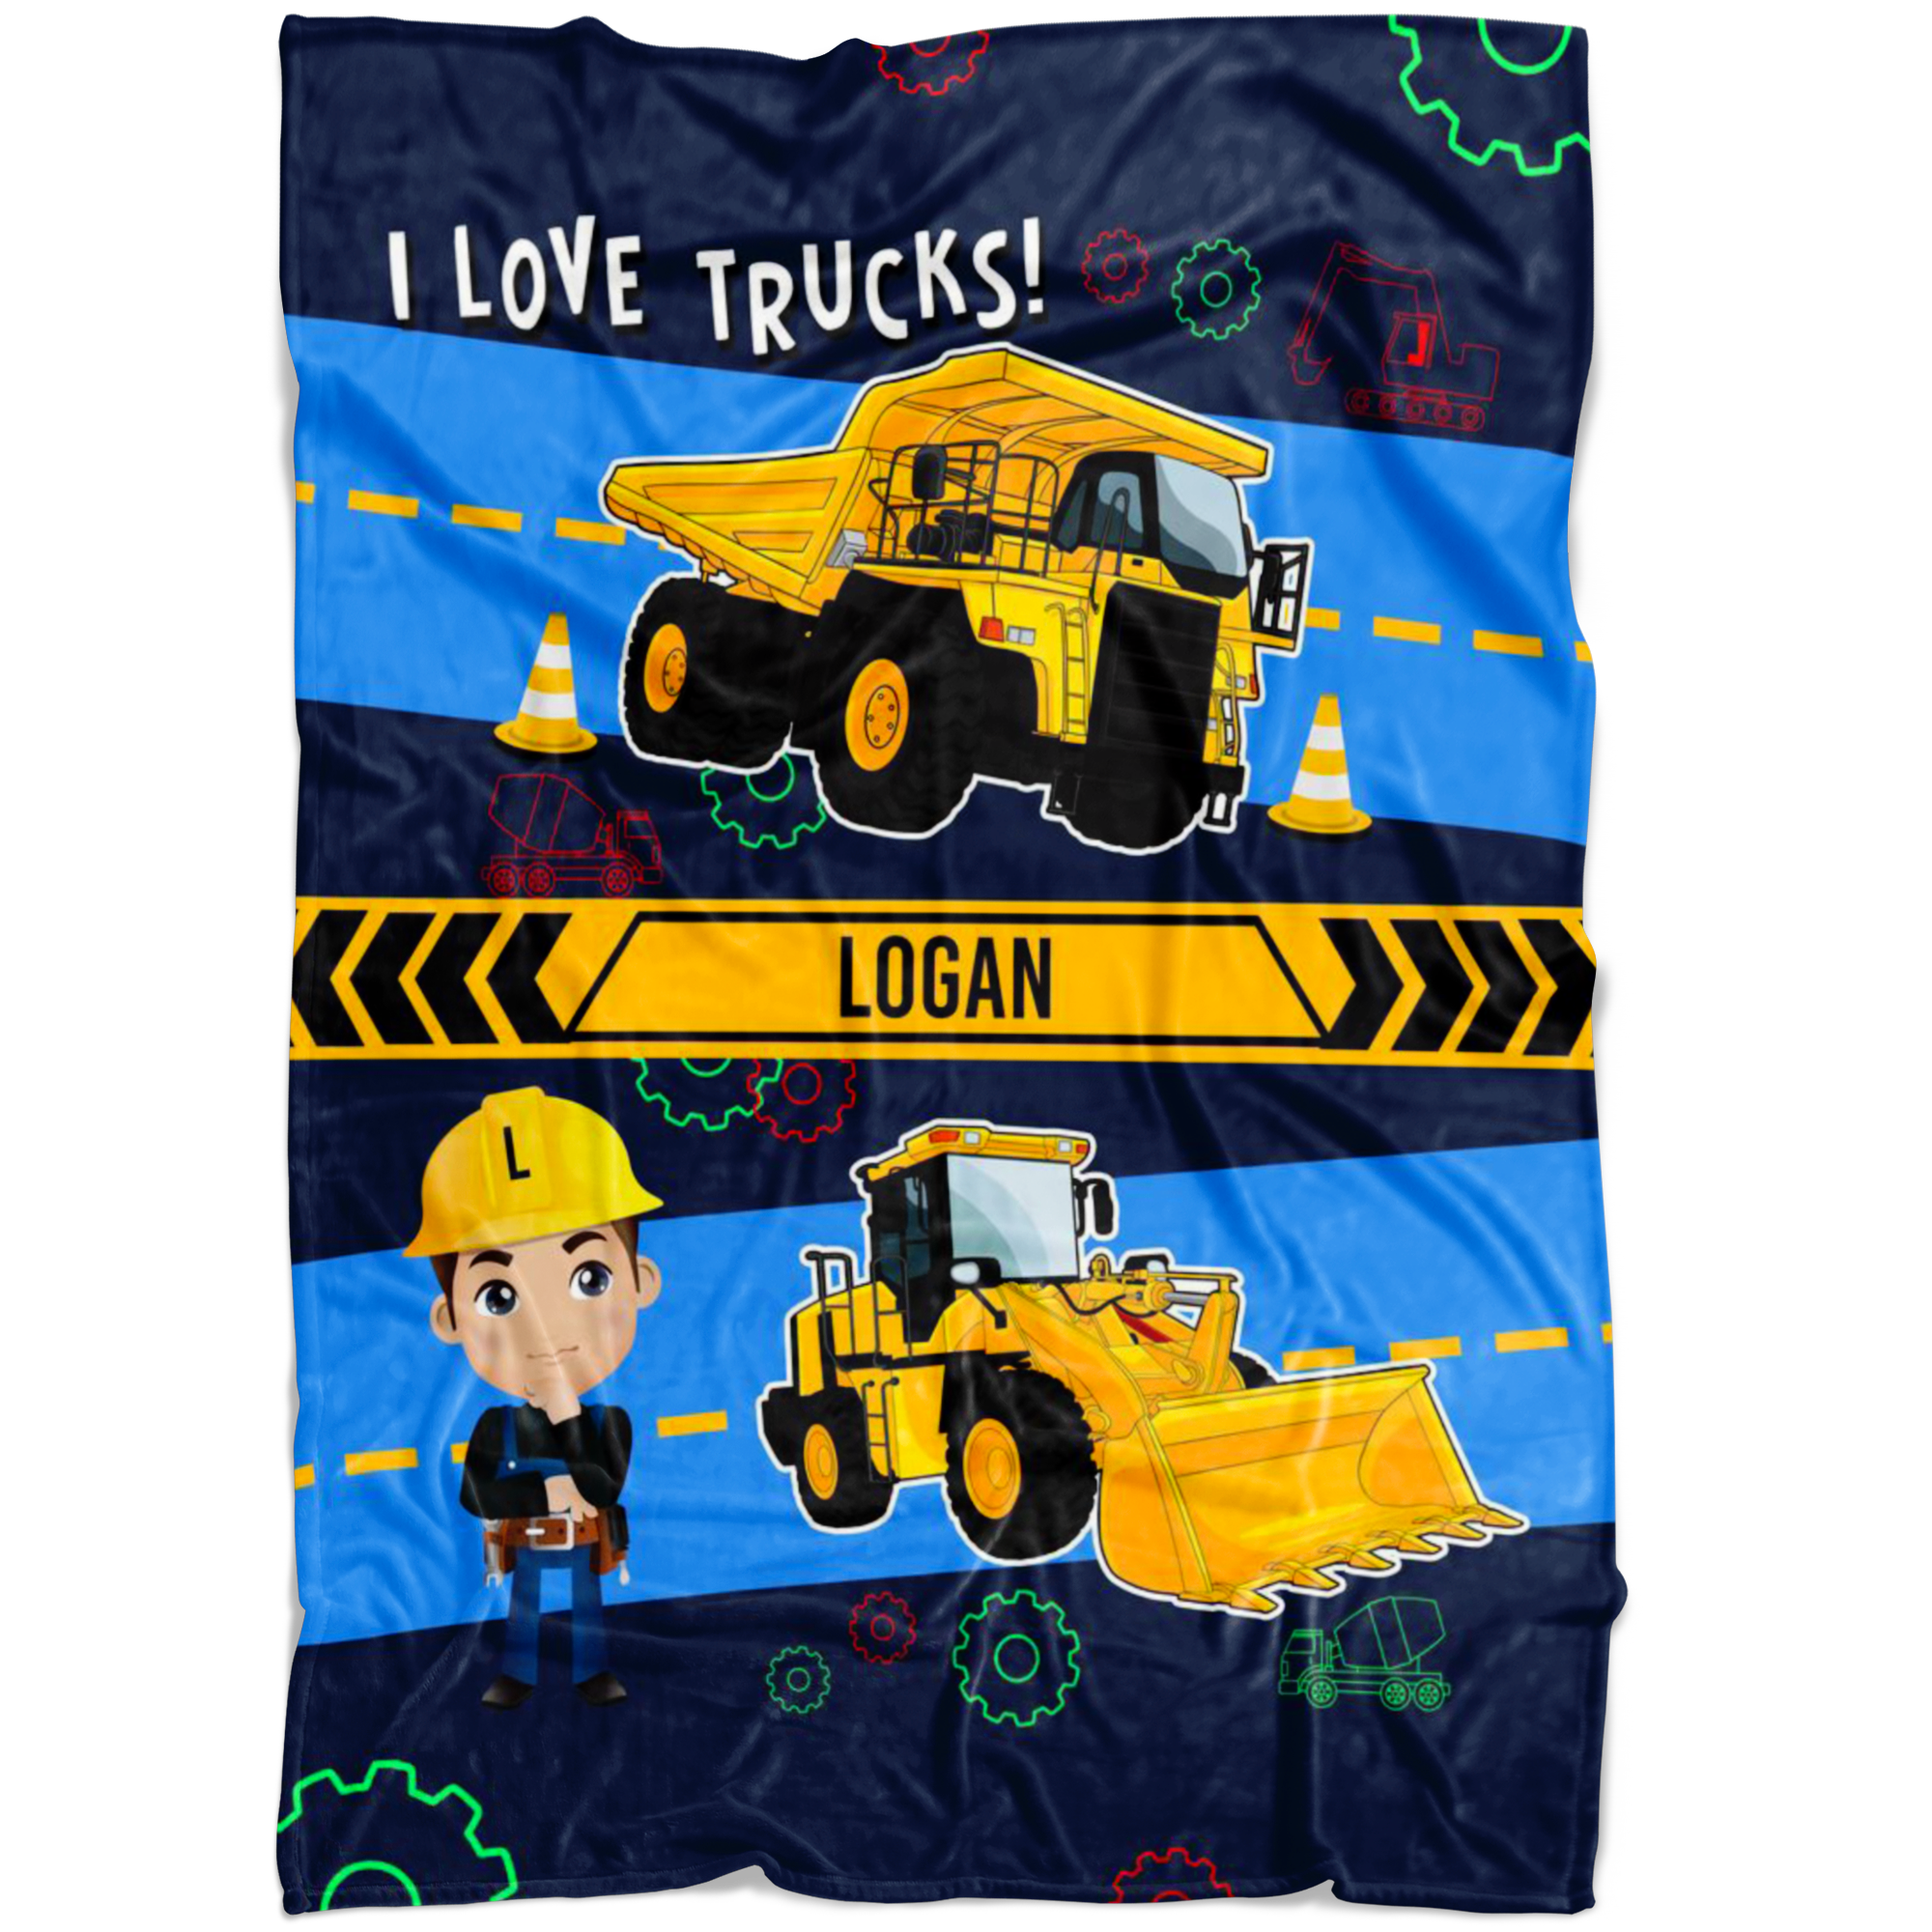 Personalized Name I Love Trucks Blanket for Boys & Girls with Character Personalization - Logan